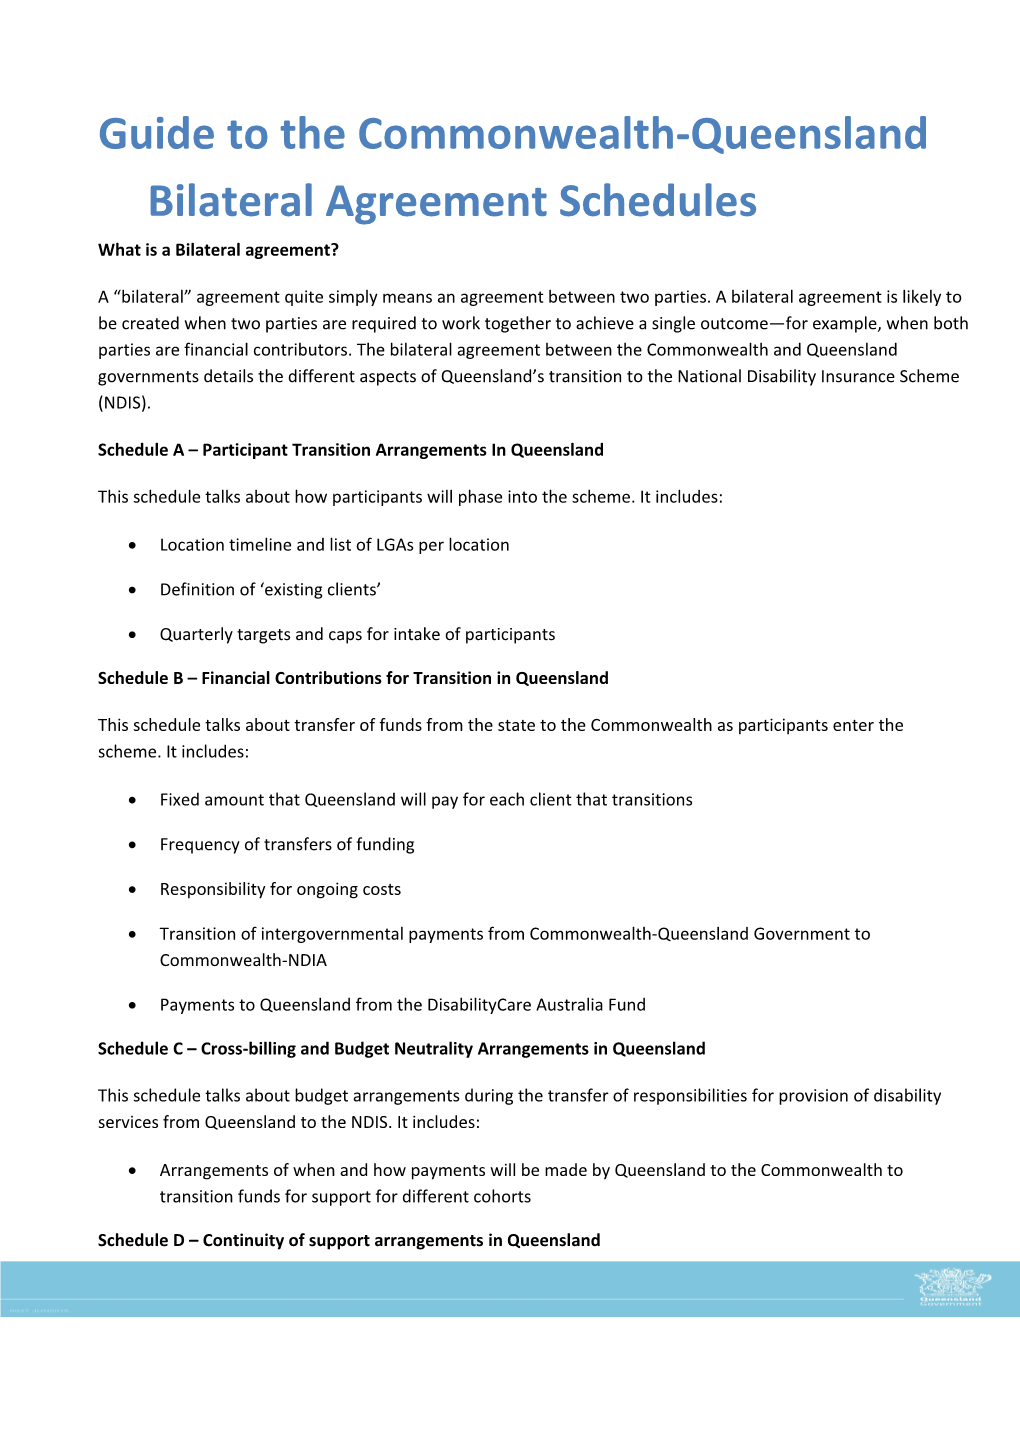 Guide to the Commonwealth Queensland Bilateral Agreement Schedules